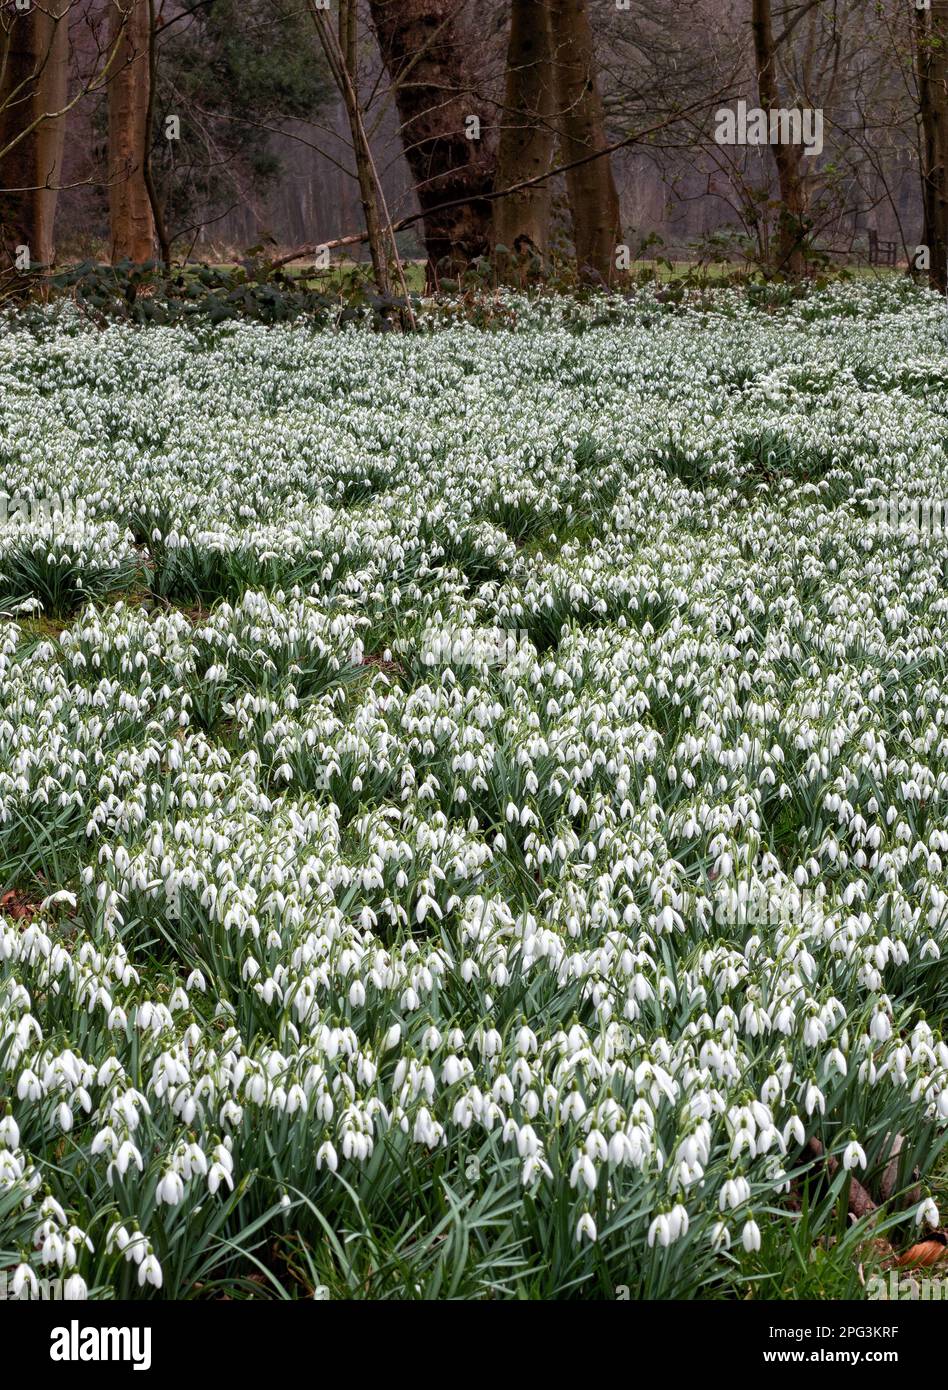 A carpet of snowdrops juxtaposed with distant trees. Photographed at Lytham Hall, Lancashire Stock Photo